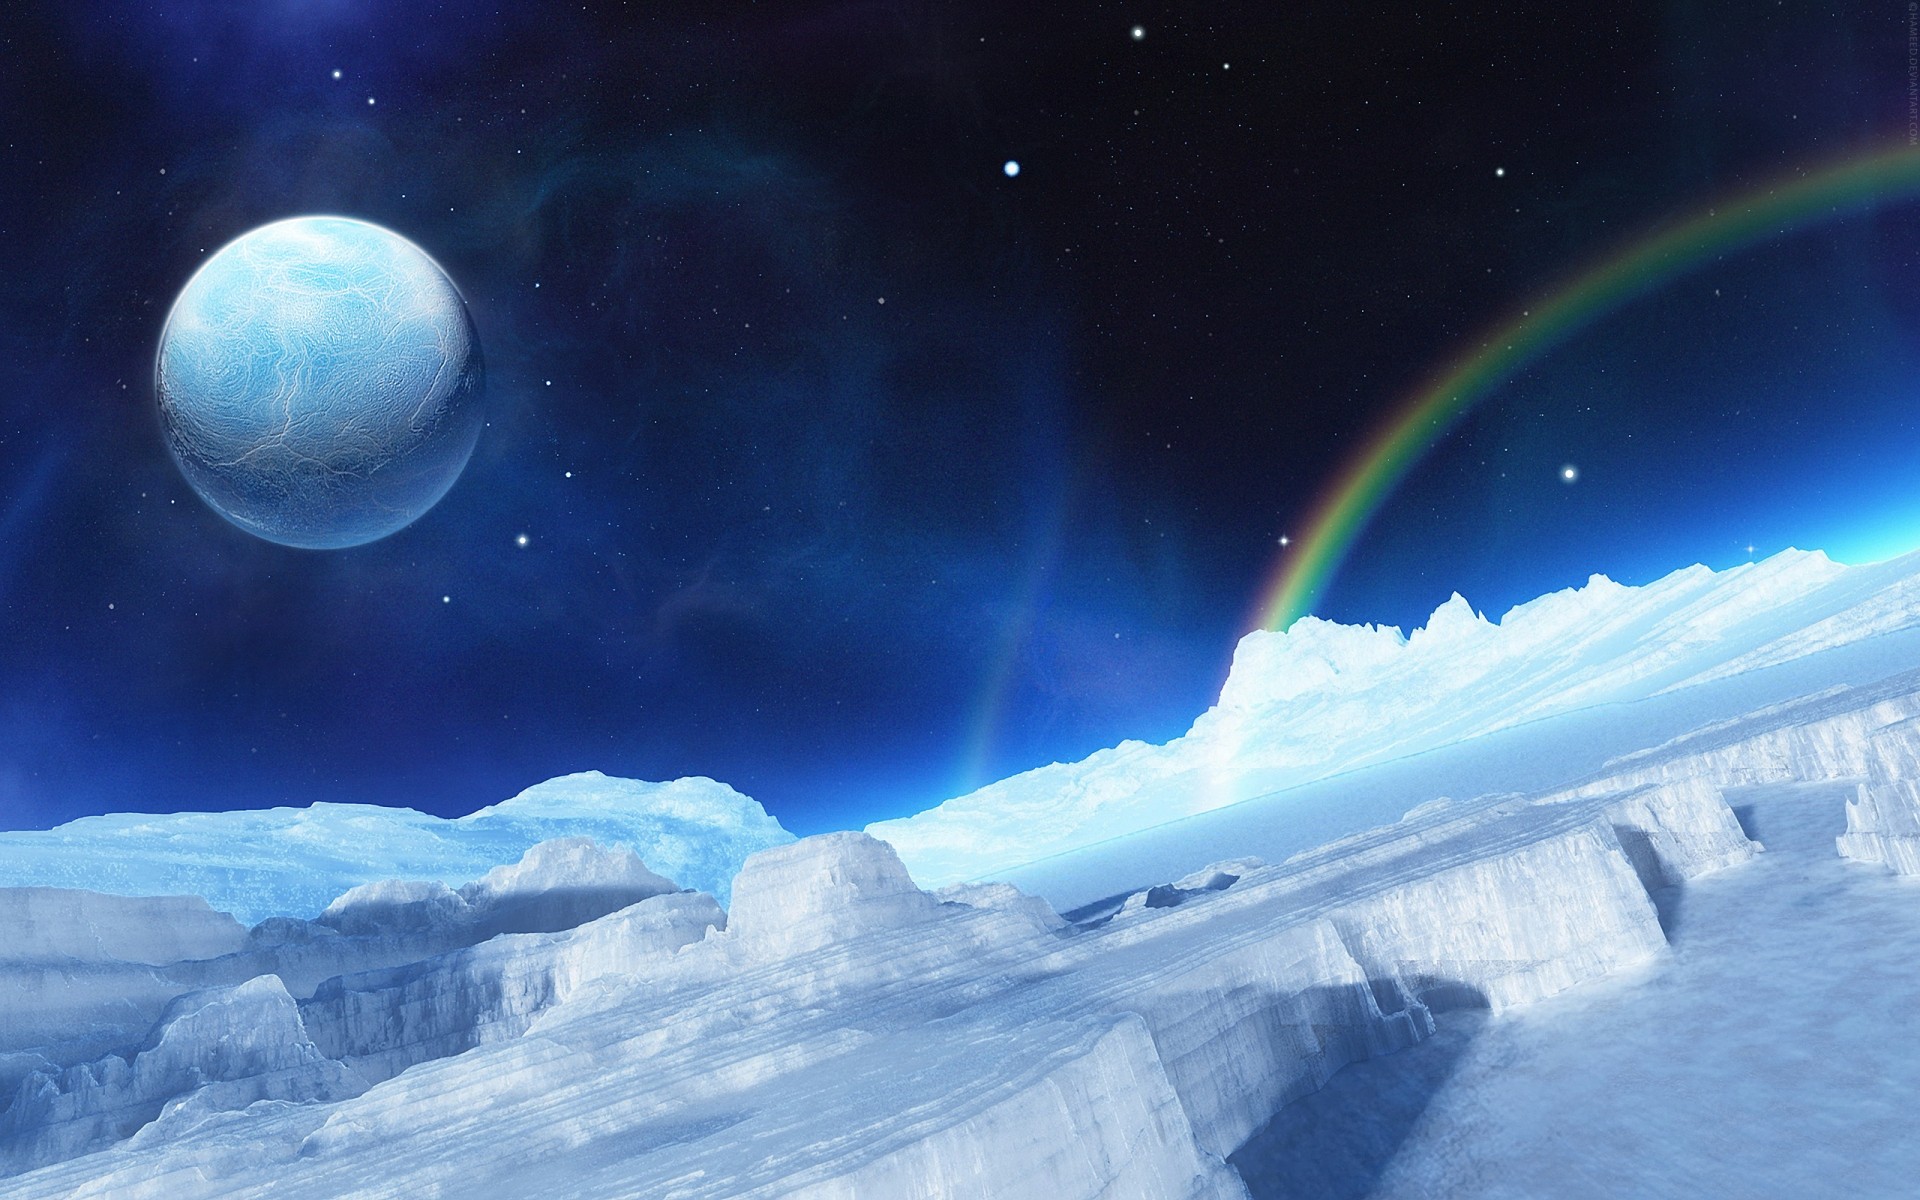 photo manipulation moon astronomy planet space sky ball-shaped winter galaxy exploration atmosphere snow light solar nature astrology sun science landscape ice rainbow